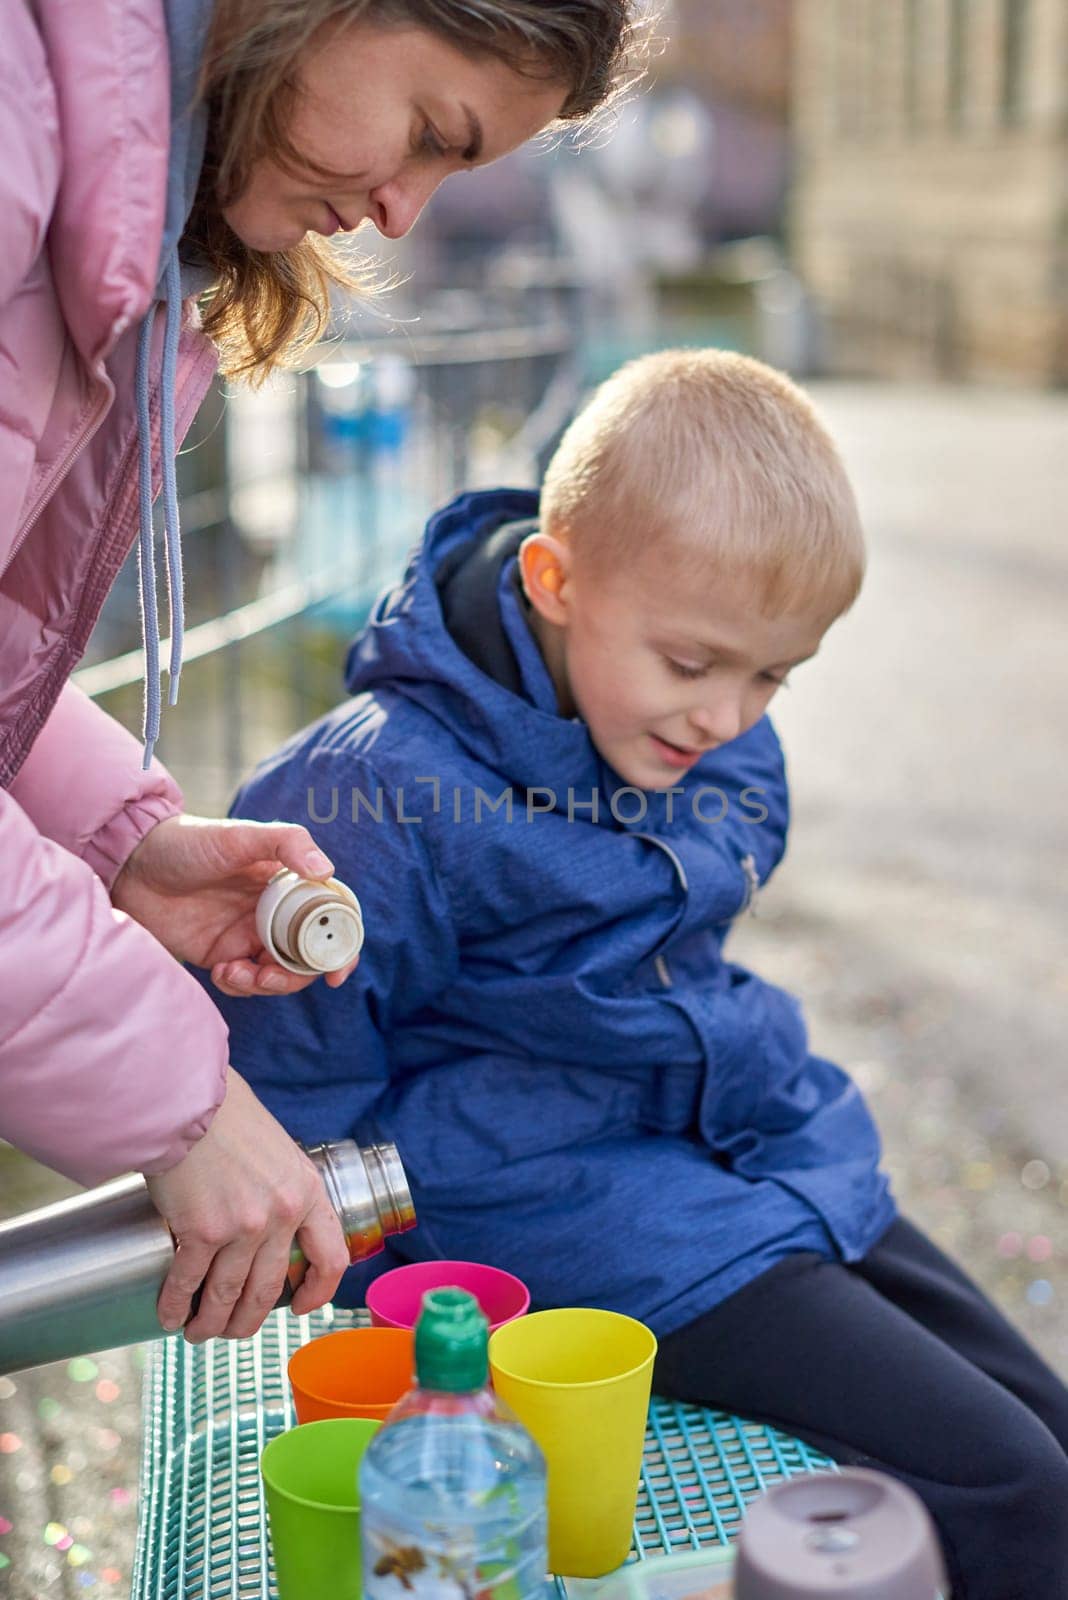 Family Picnic Delight: Cheerful 8-Year-Old Blond Boy in Blue Winter Jacket Sits on Bench While Mom Pours Tea from Thermos, Autumn or Winter. a joyful 8-year-old blond boy in a blue winter jacket, sitting on a bench while his mom pours tea from a thermos into colorful plastic cups. by Andrii_Ko